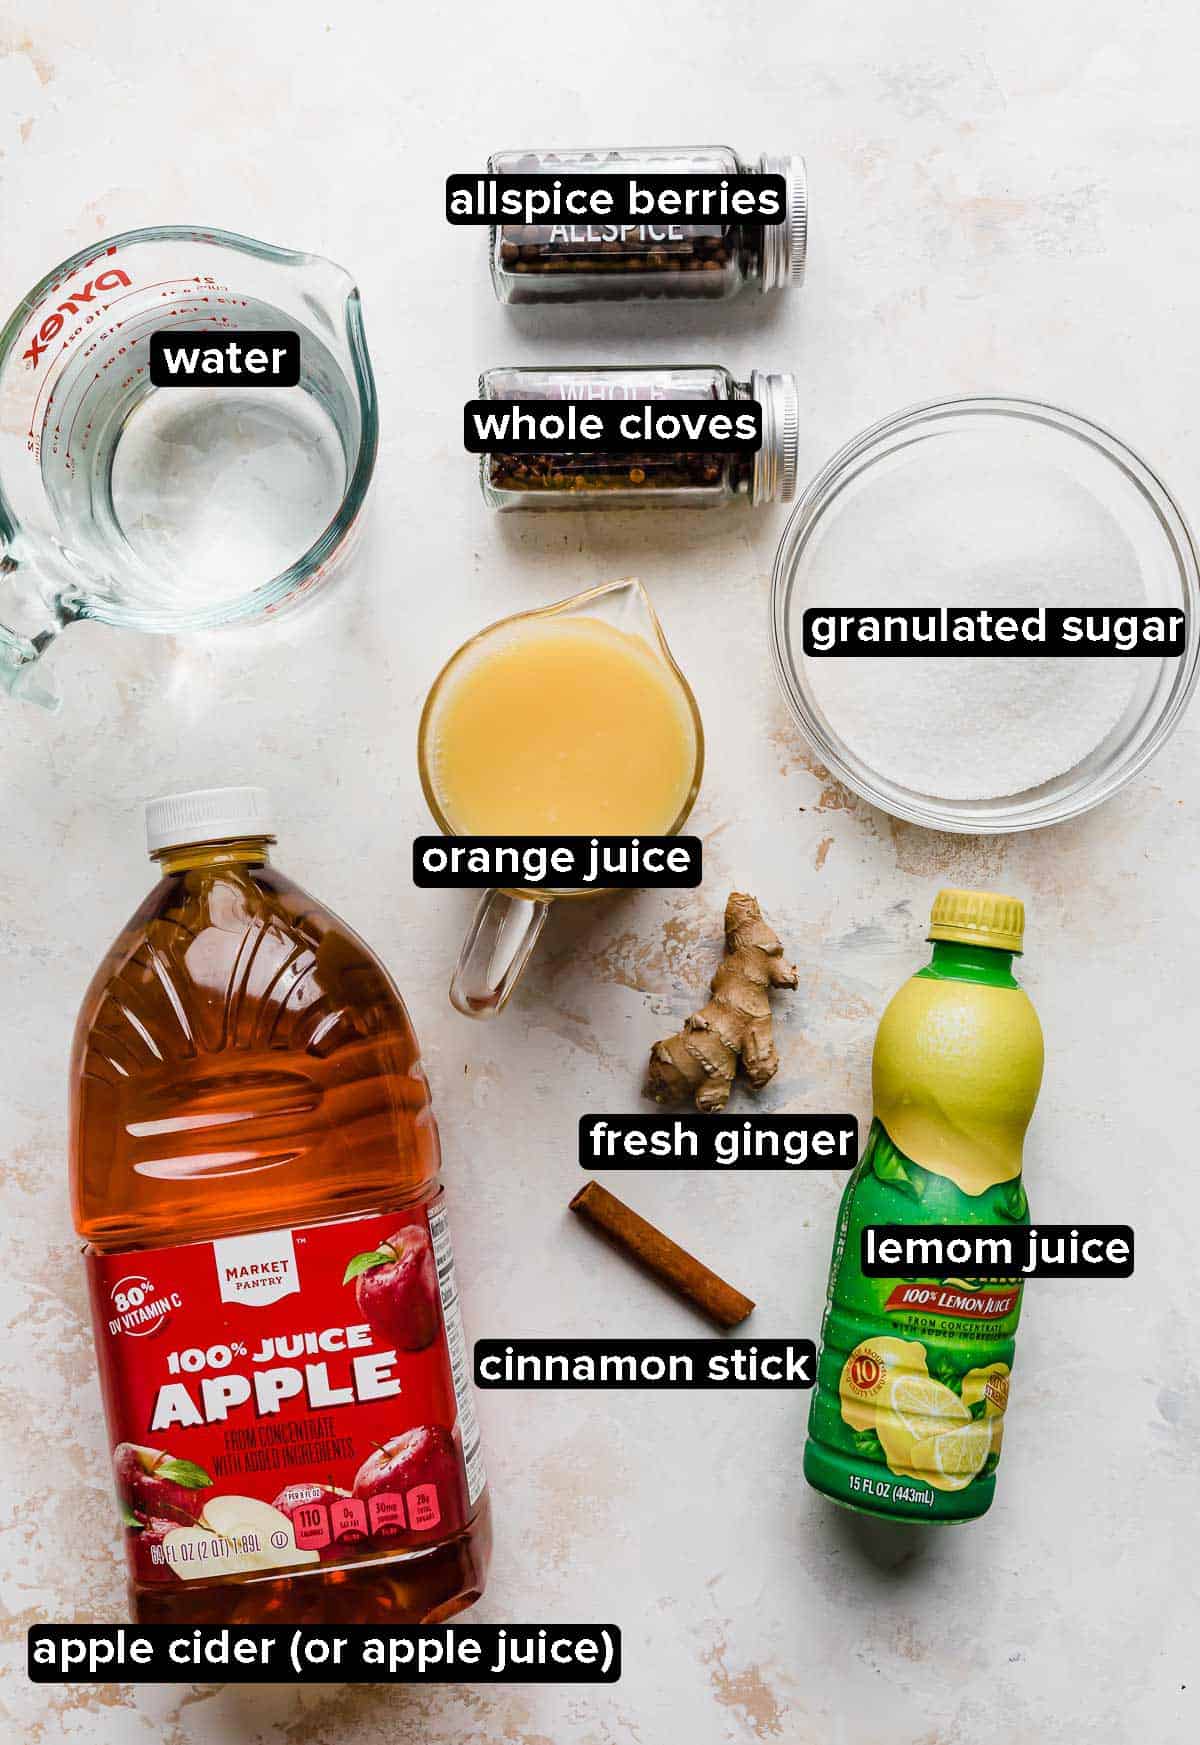 Homemade wassail ingredients on a white textured background: apple cider or apple juice, orange juice, lemon juice, water, sugar, and spices.